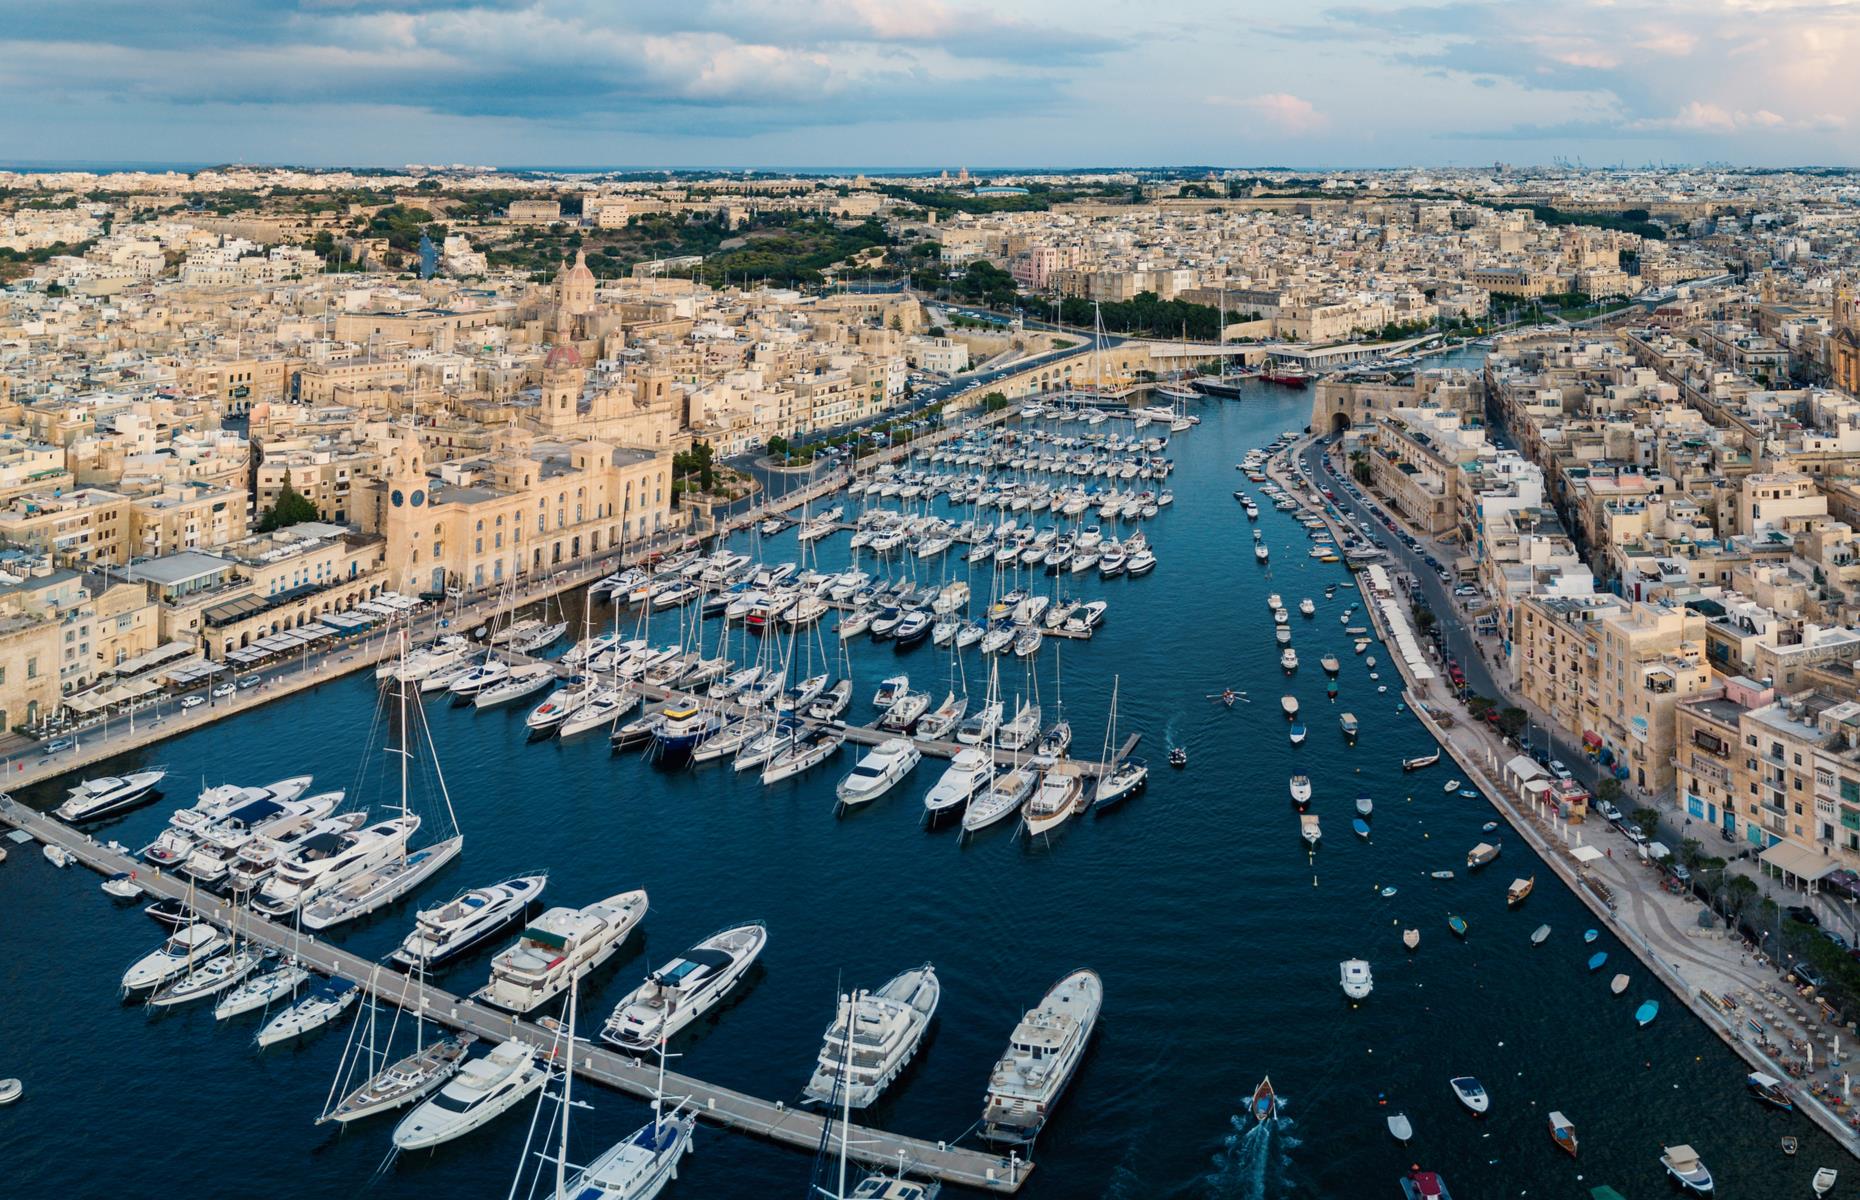 <p>Filled with a dazzling array of luxury yachts, Valletta’s Grand Harbour is the hub of this historic city. The port has been used for trade since Roman times, although nowadays it’s focused on cruise ships as opposed to cargo.</p>